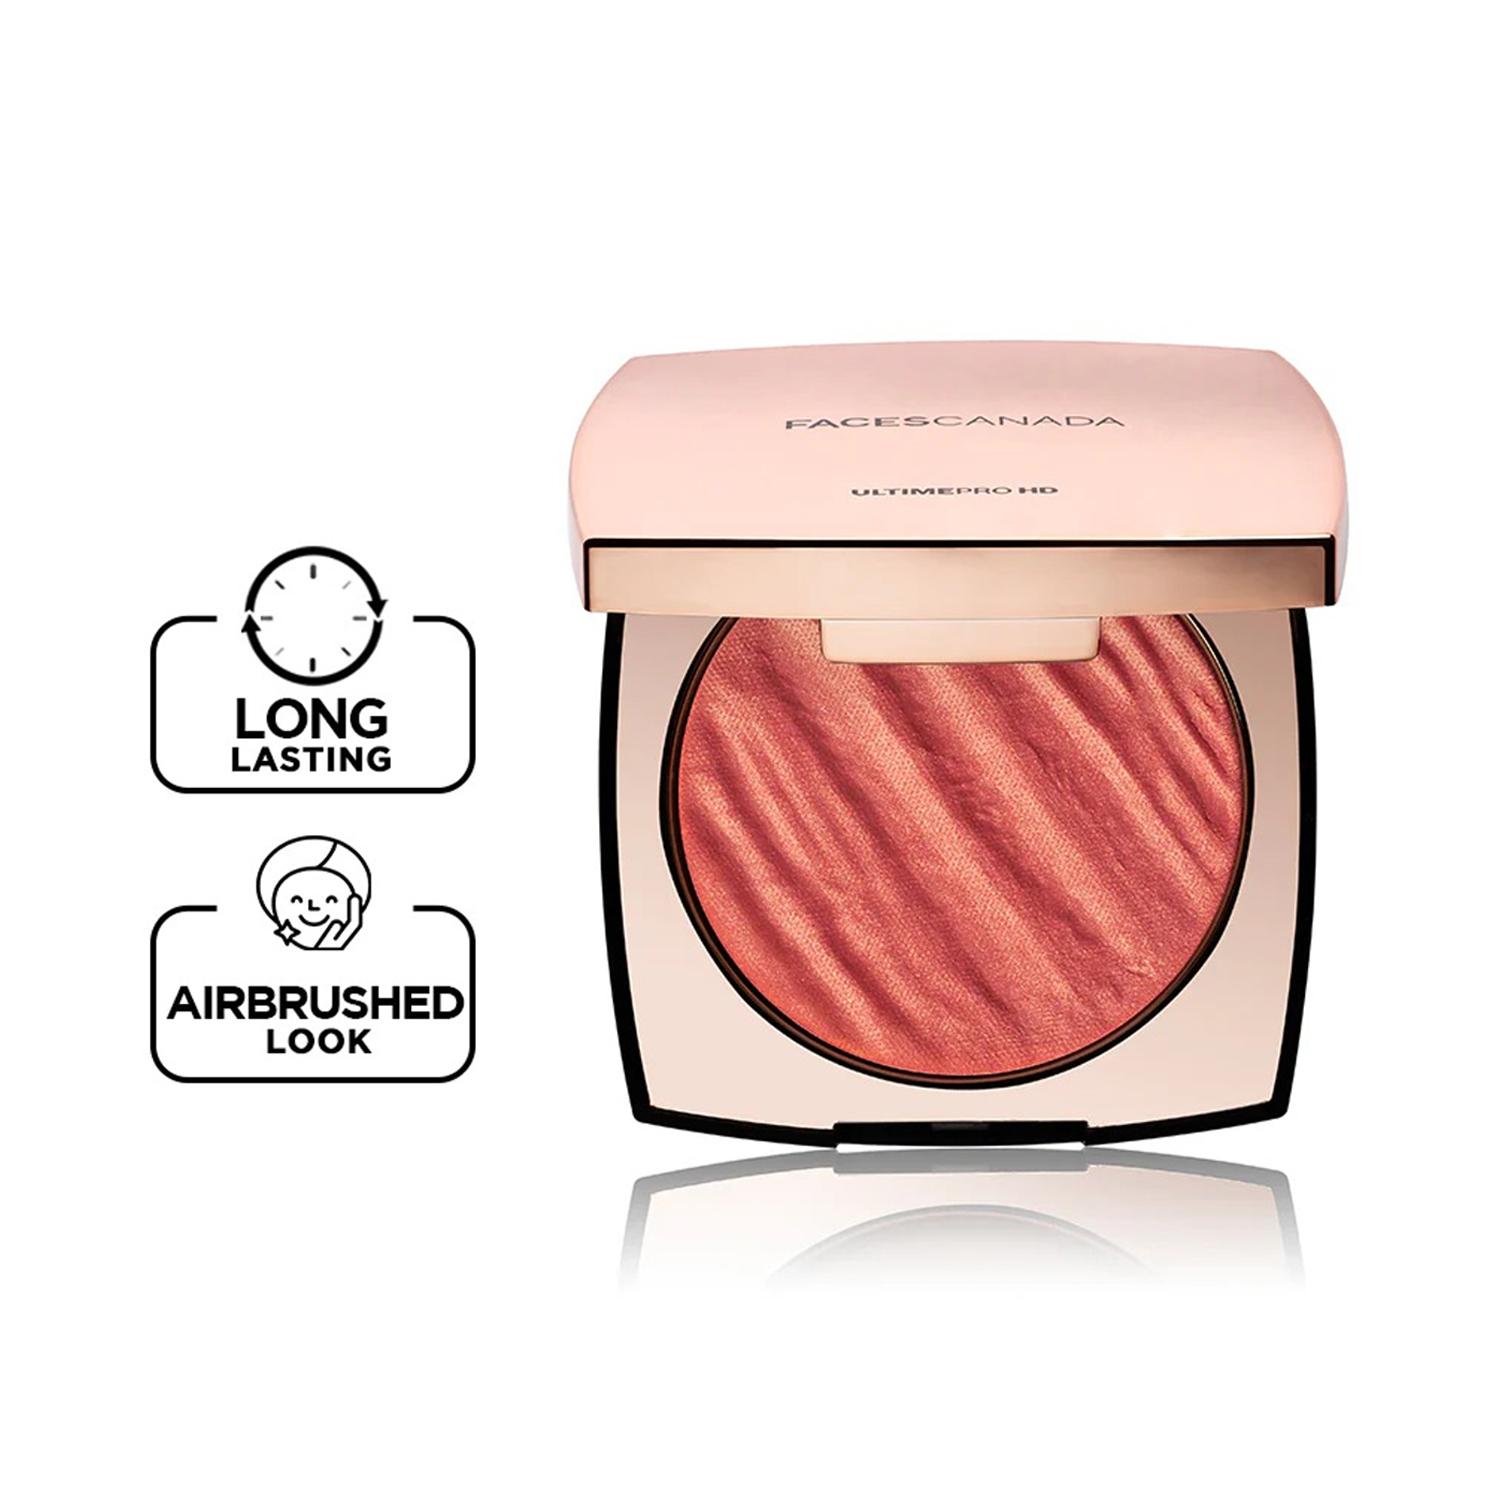 Faces Canada | Faces Canada Ultime Pro HD Lights Camera Blush- Blossom, 2-in-1 Blush & Highlighter (6.5 g)